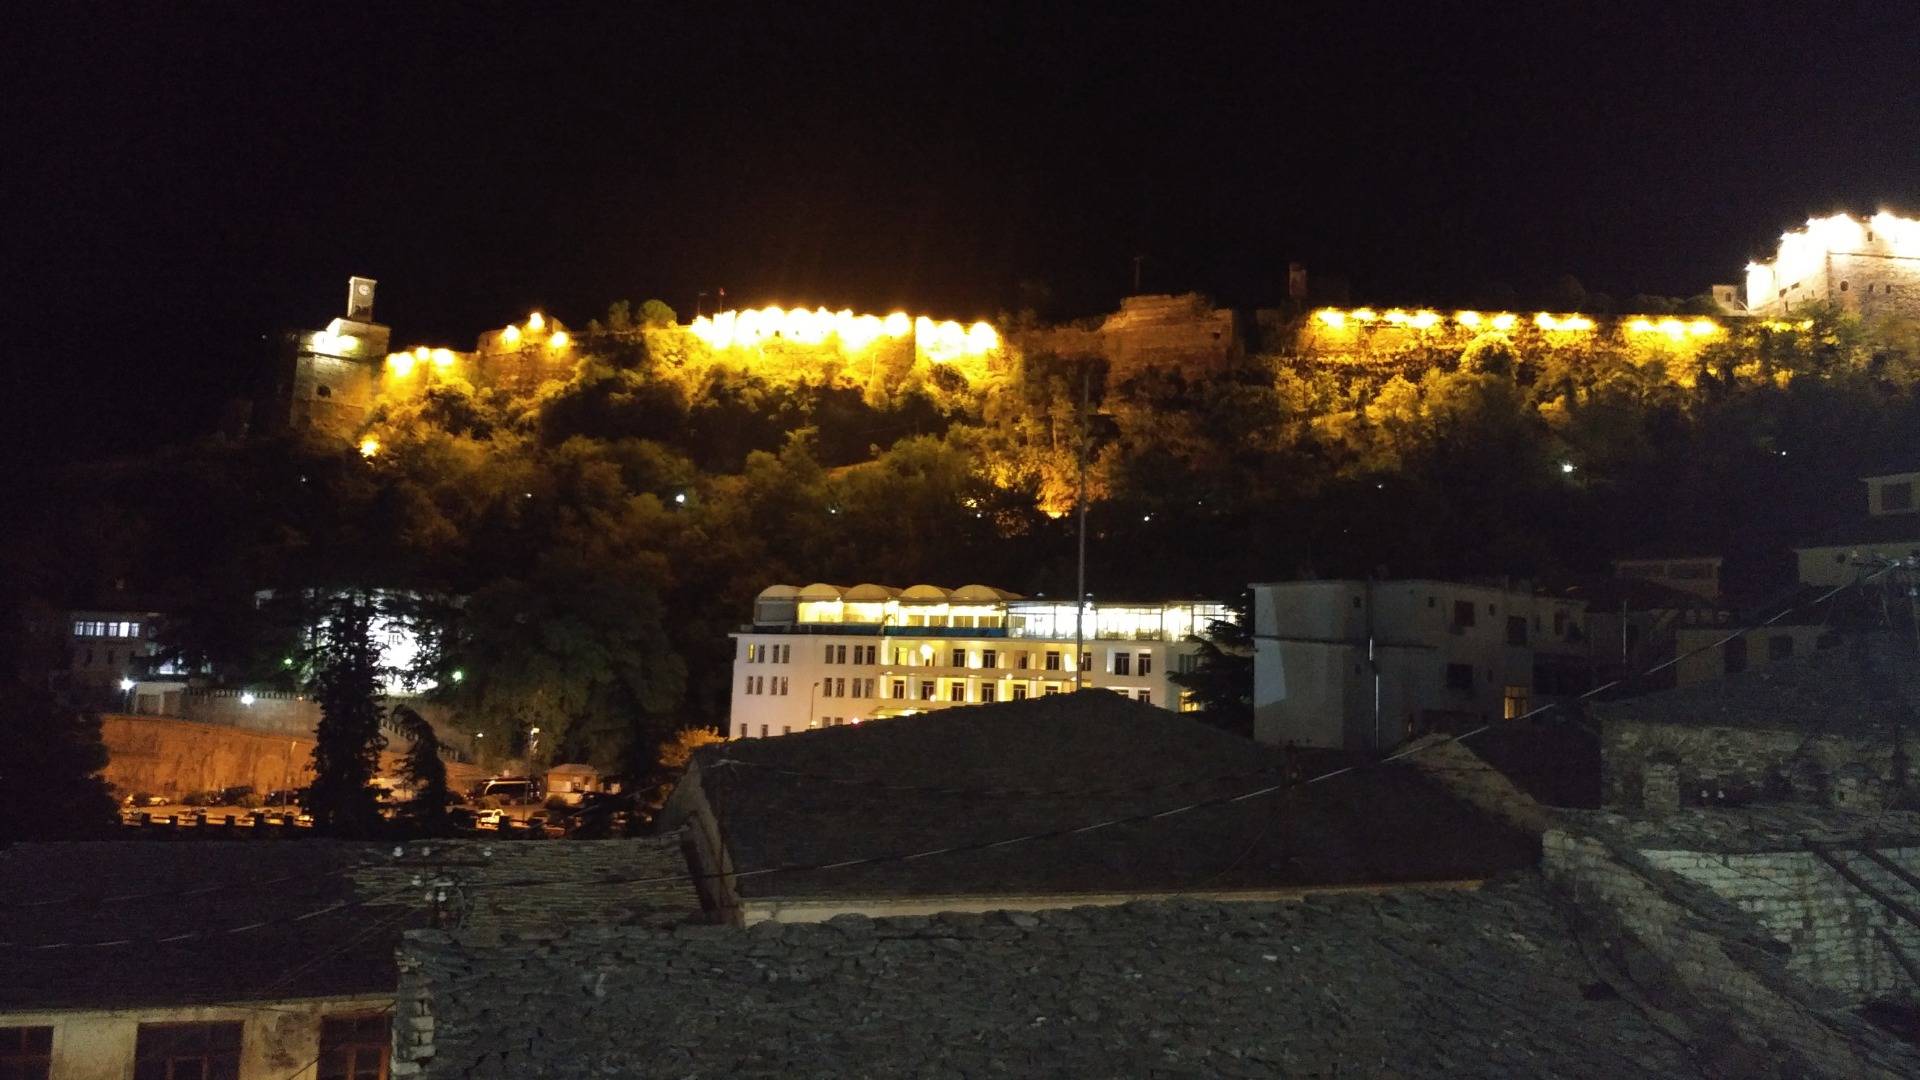 A night view to the castle